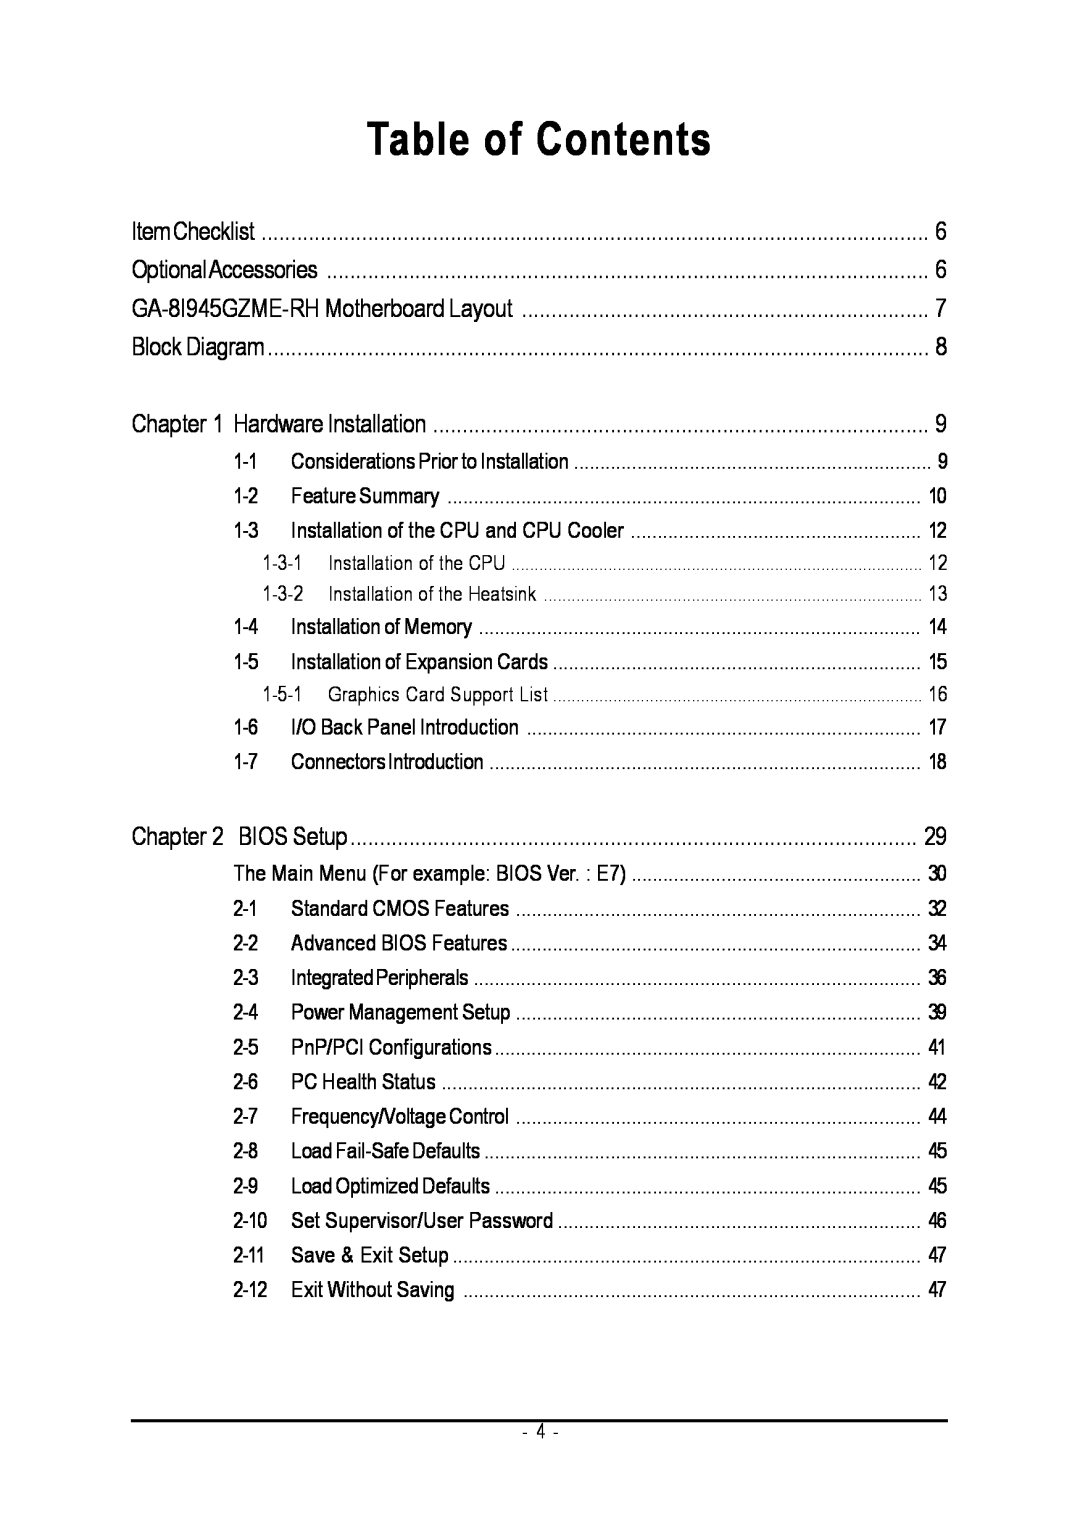 Intel GA-8I945GZME-RH user manual Table of Contents 